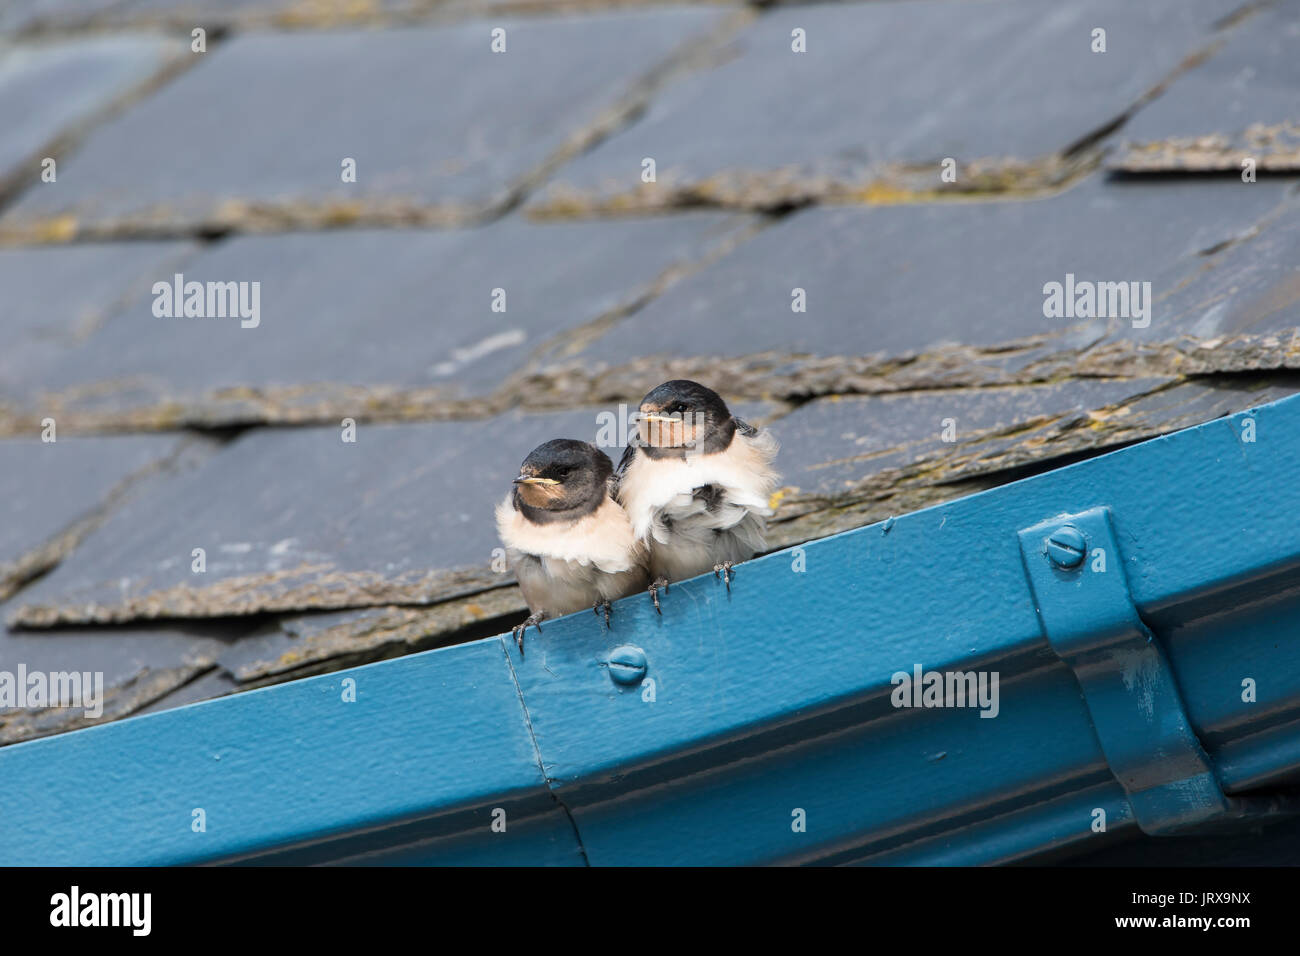 A pair of juvenile swallow chicks Hirundo rustica huddled together on a guttering Stock Photo